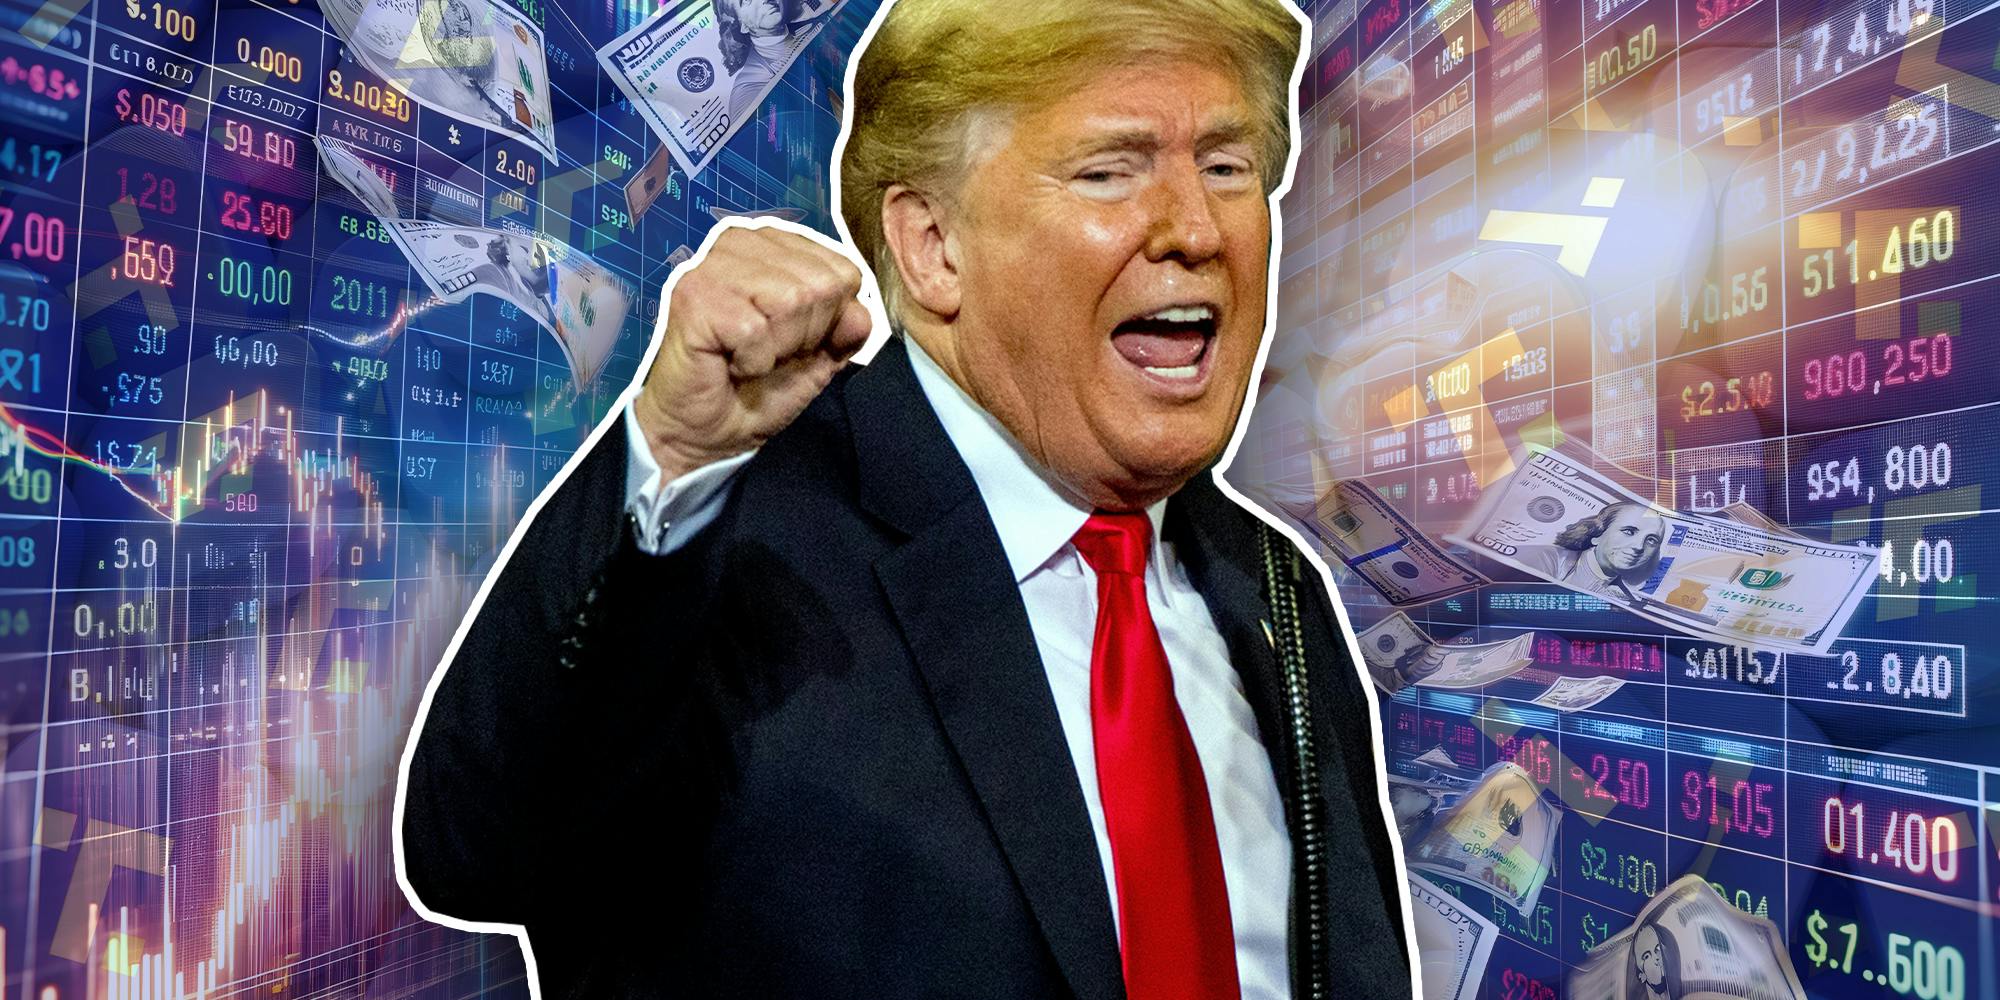 ‘Hold that line patriots!’ Trump’s Truth Social investors are losing the battle to short sellers